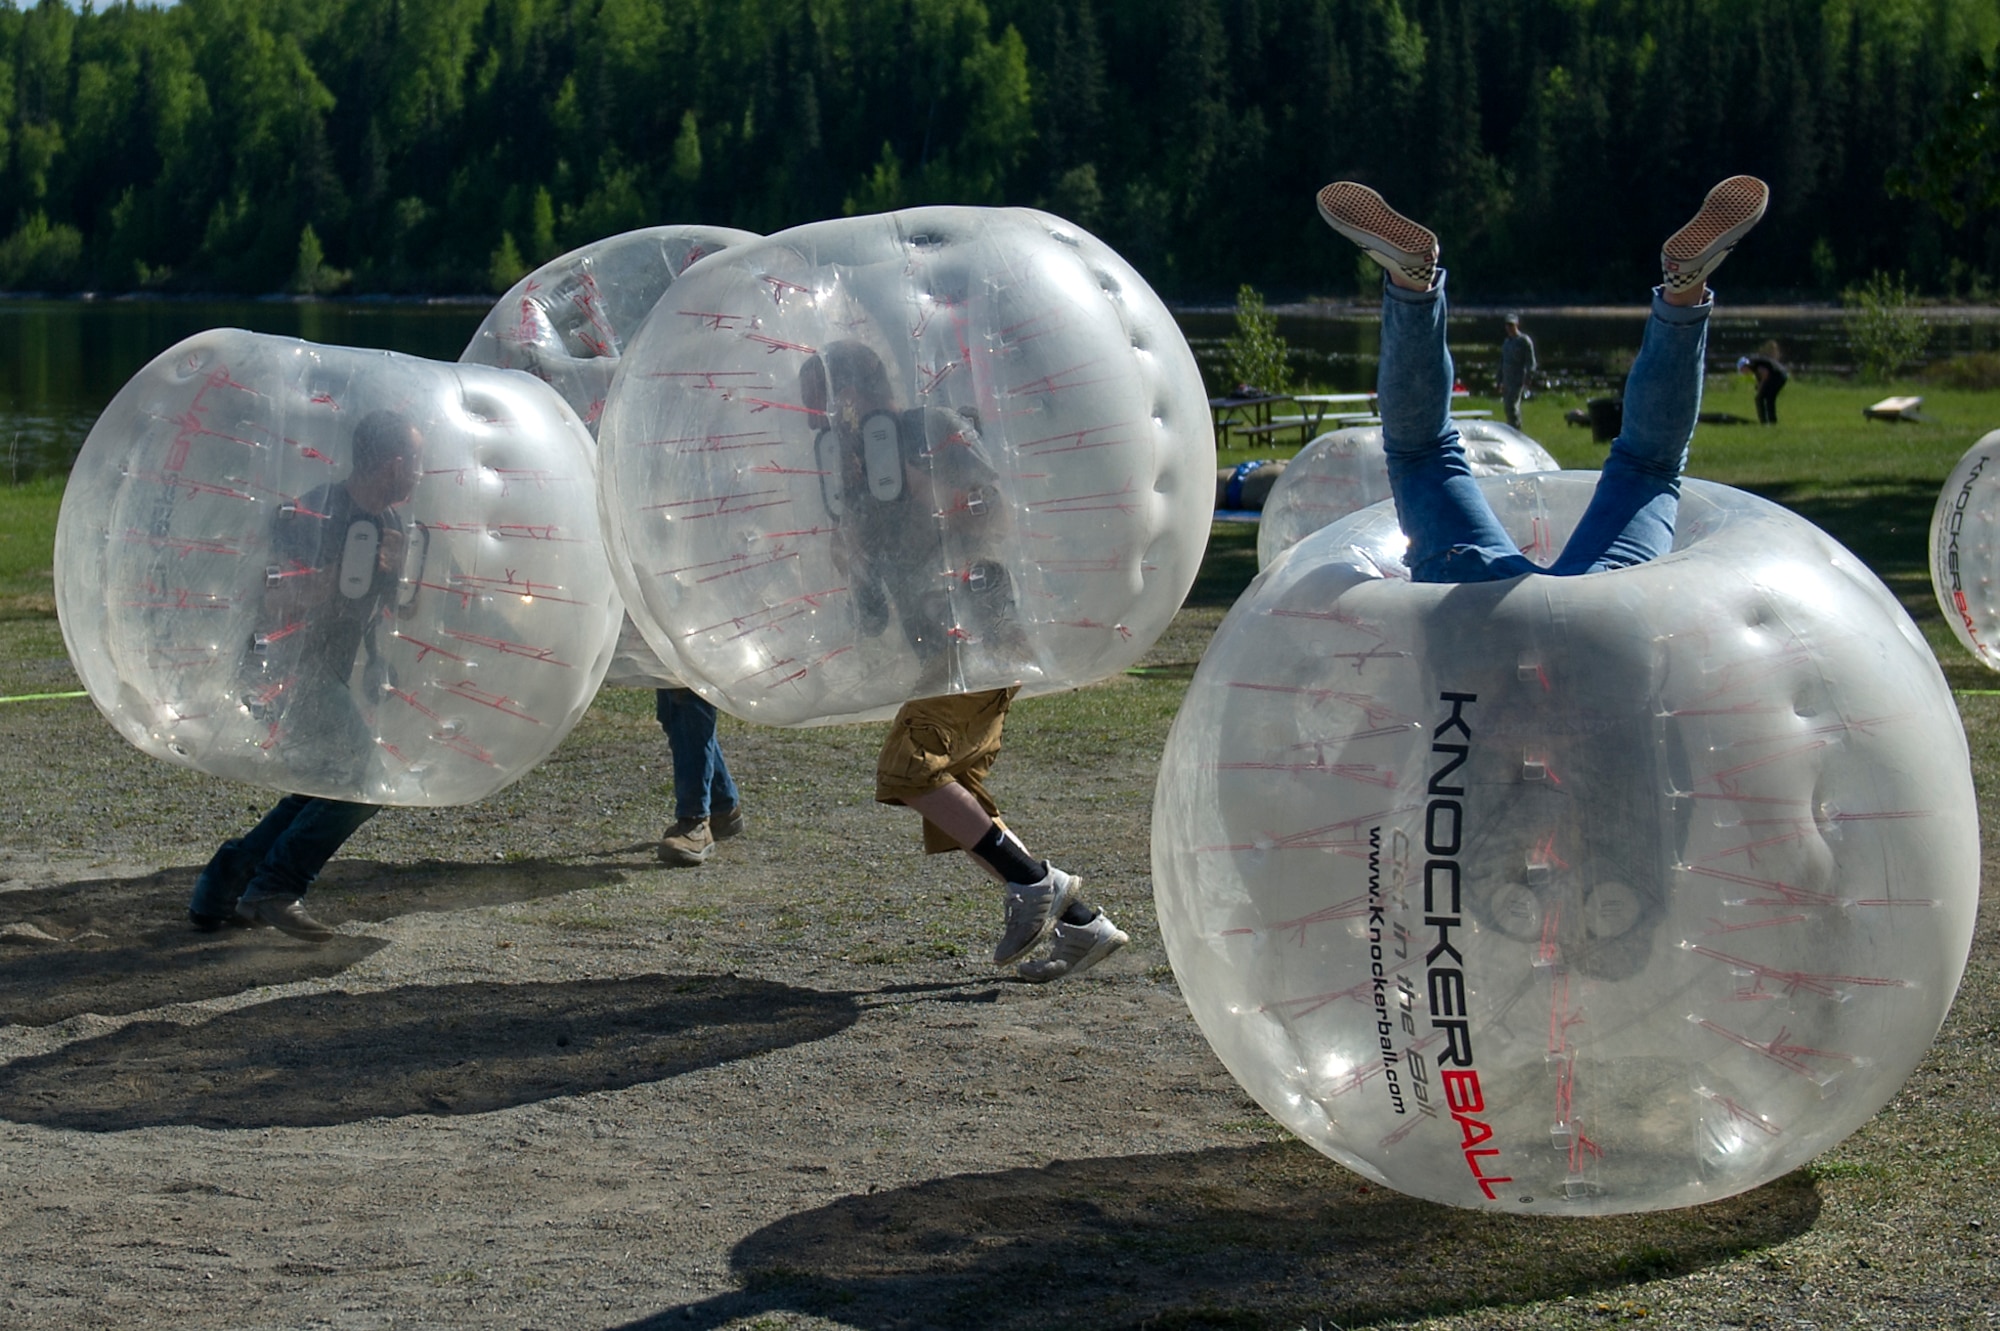 Airmen assigned to Joint Base Elemendorf-Richardson participate in activities during an Airmen Appreciation Day June 1, 2018 at Otter Lake, Alaska